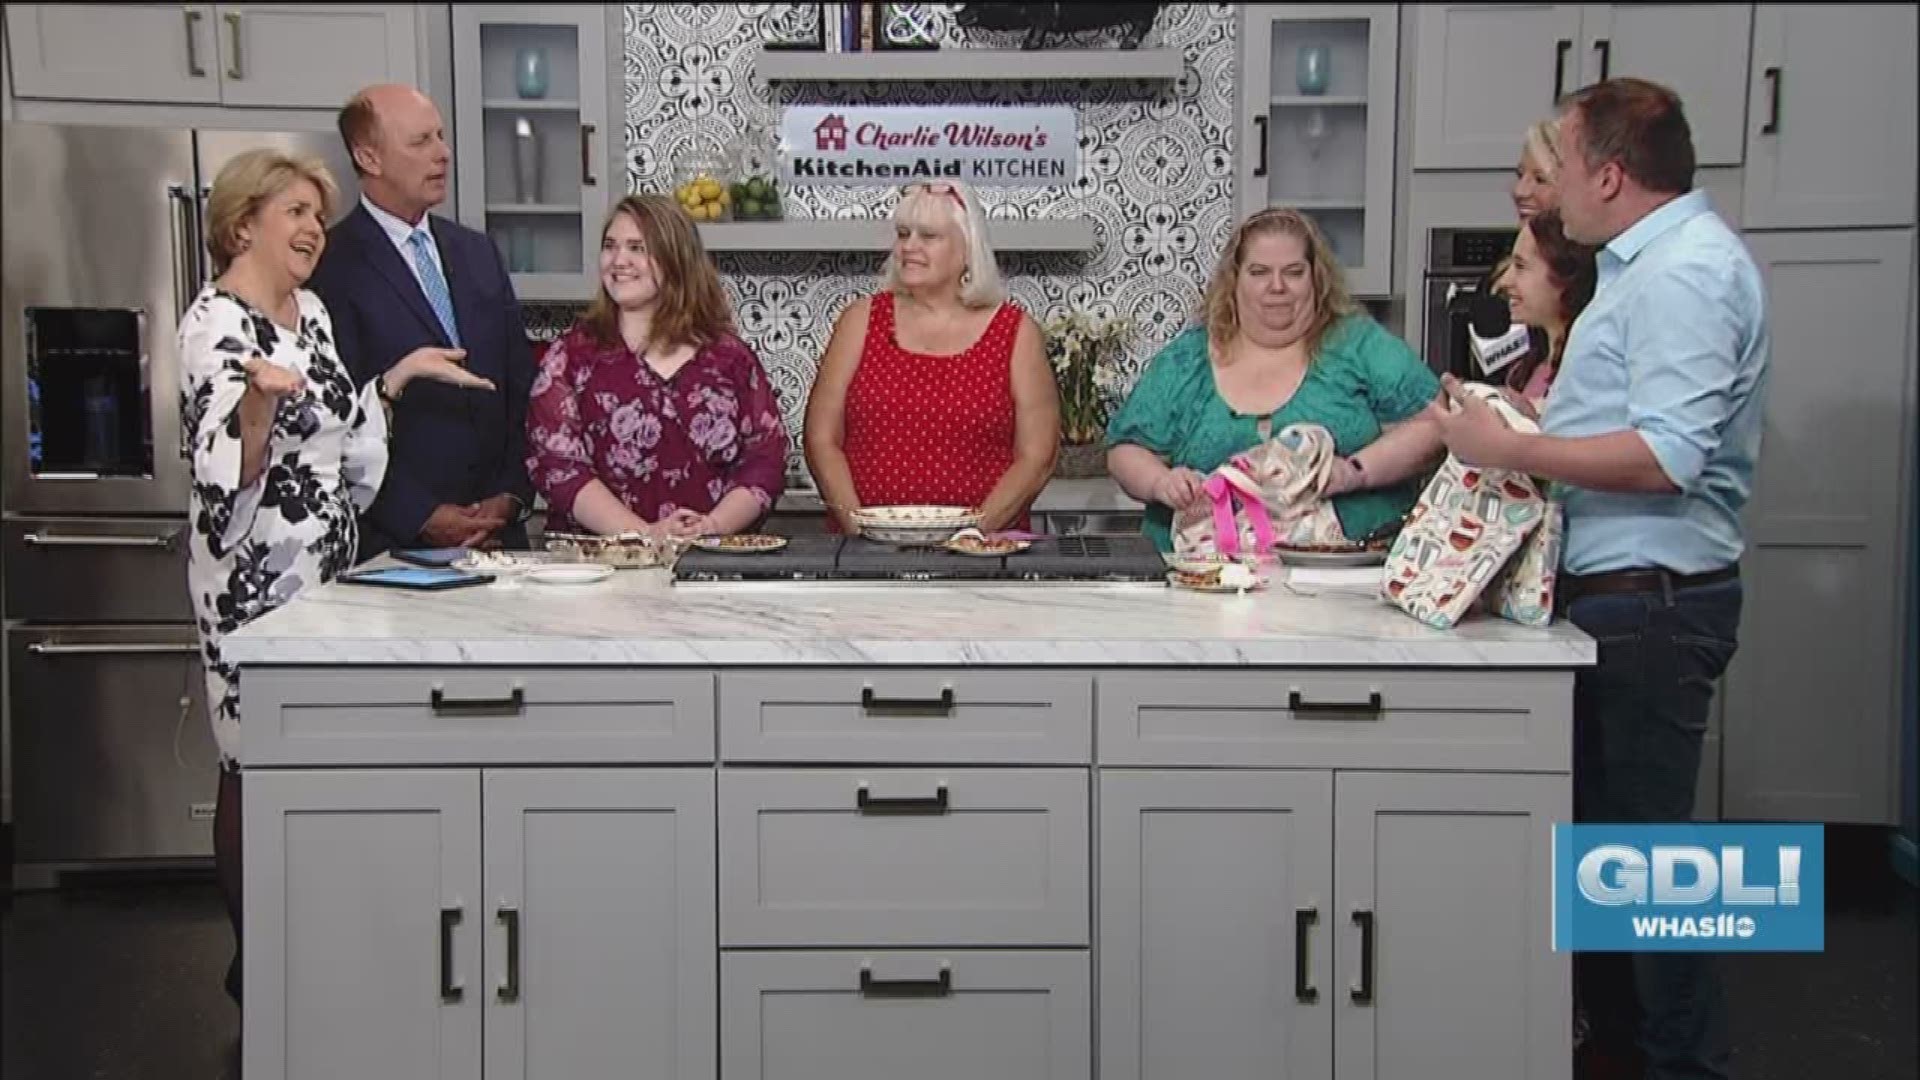 We announce the winner of the "Baked from the Heart: Waitress Pie Contest" on Great Day Live! "Waitress" the musical runs June 26 through July 1, 2018 at the Kentucky Center. Showtimes and tickets are online at www.KentuckyCenter.org